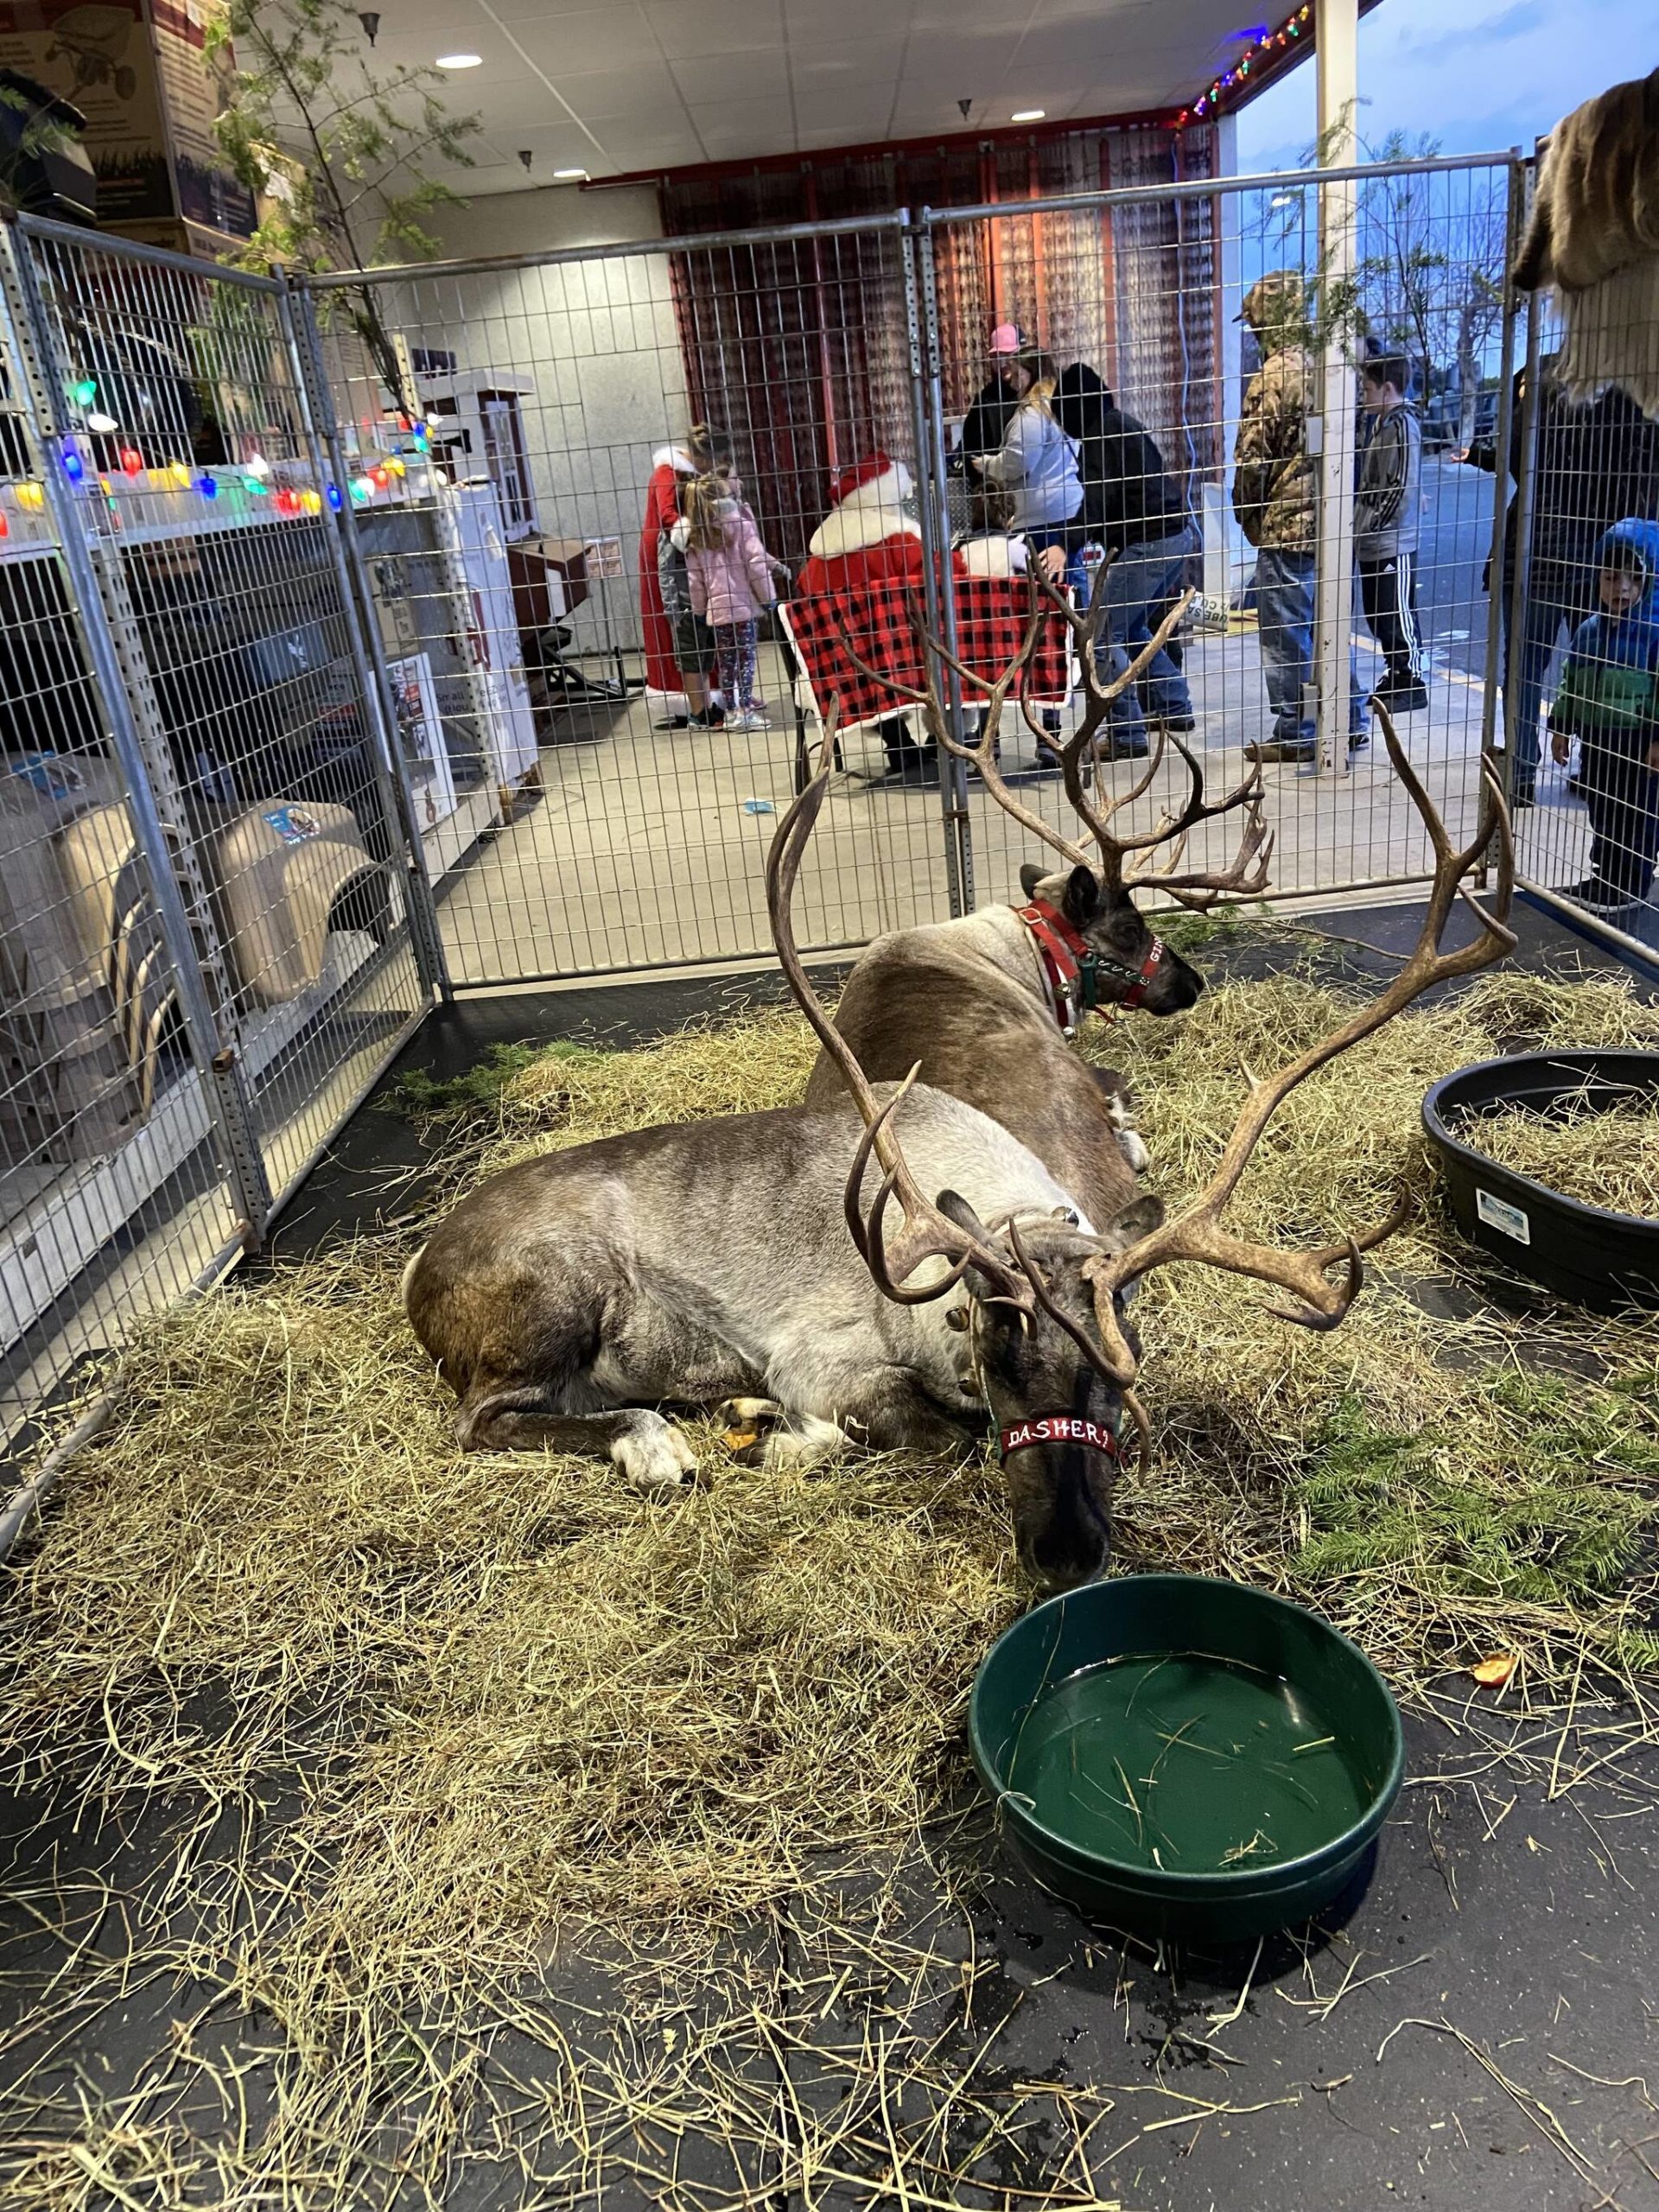 Coastal, in partnership with Purina, will be bringing Santa’s reindeer to the Coastal store across from the Outlet Collection mall in Auburn on Sunday, Dec. 12, from 2–6 p.m. Photo courtesy of Coastal.